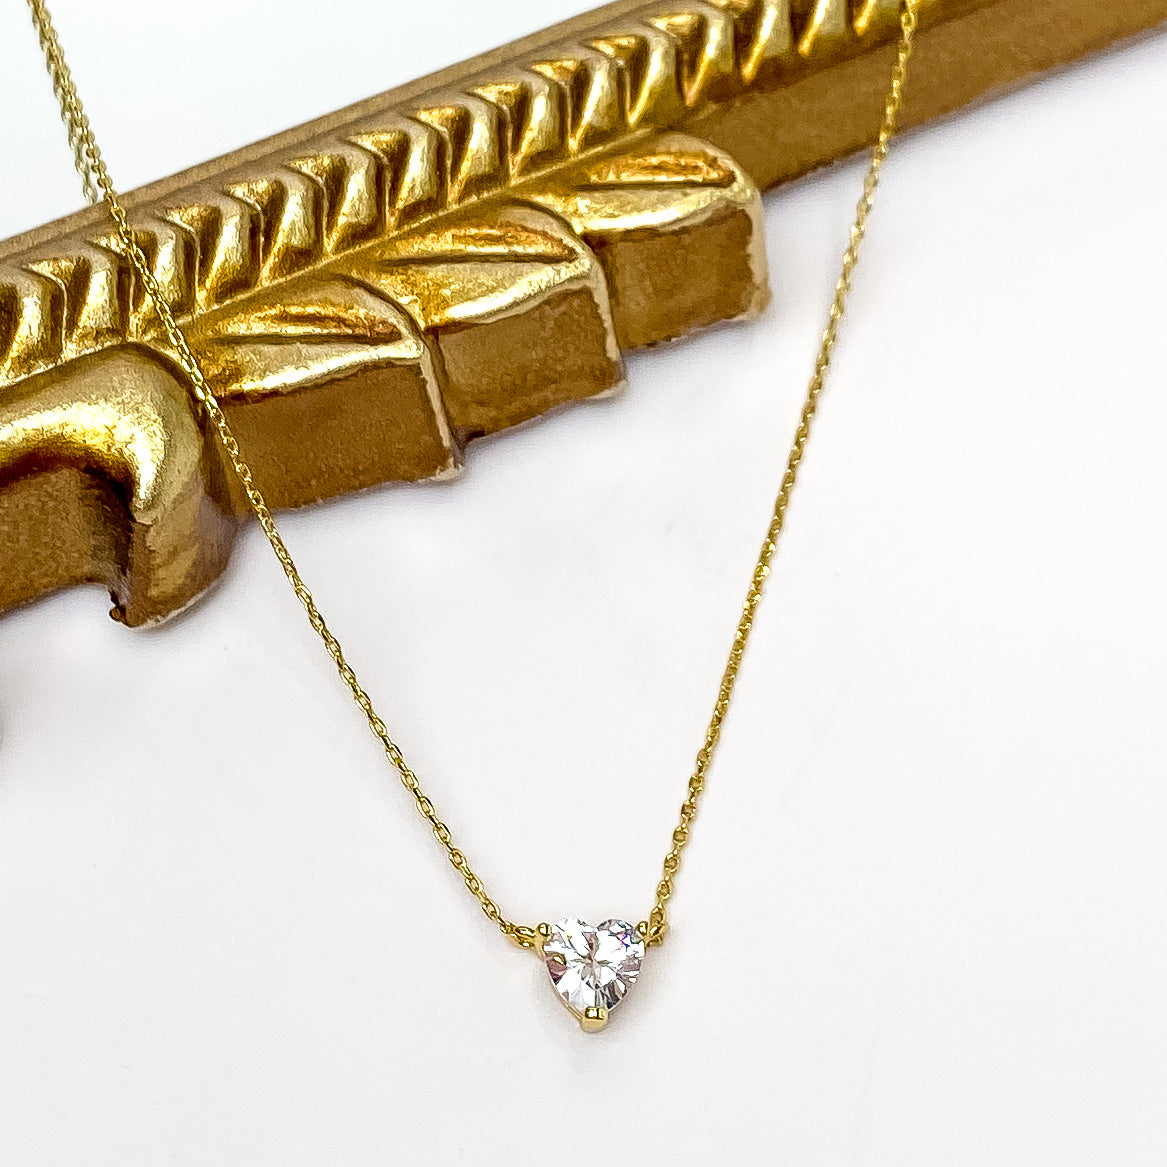 Gold chain necklace with a clear crystal heart pendant. This necklace is pictured partially laying on a gold mirror on a white background. 